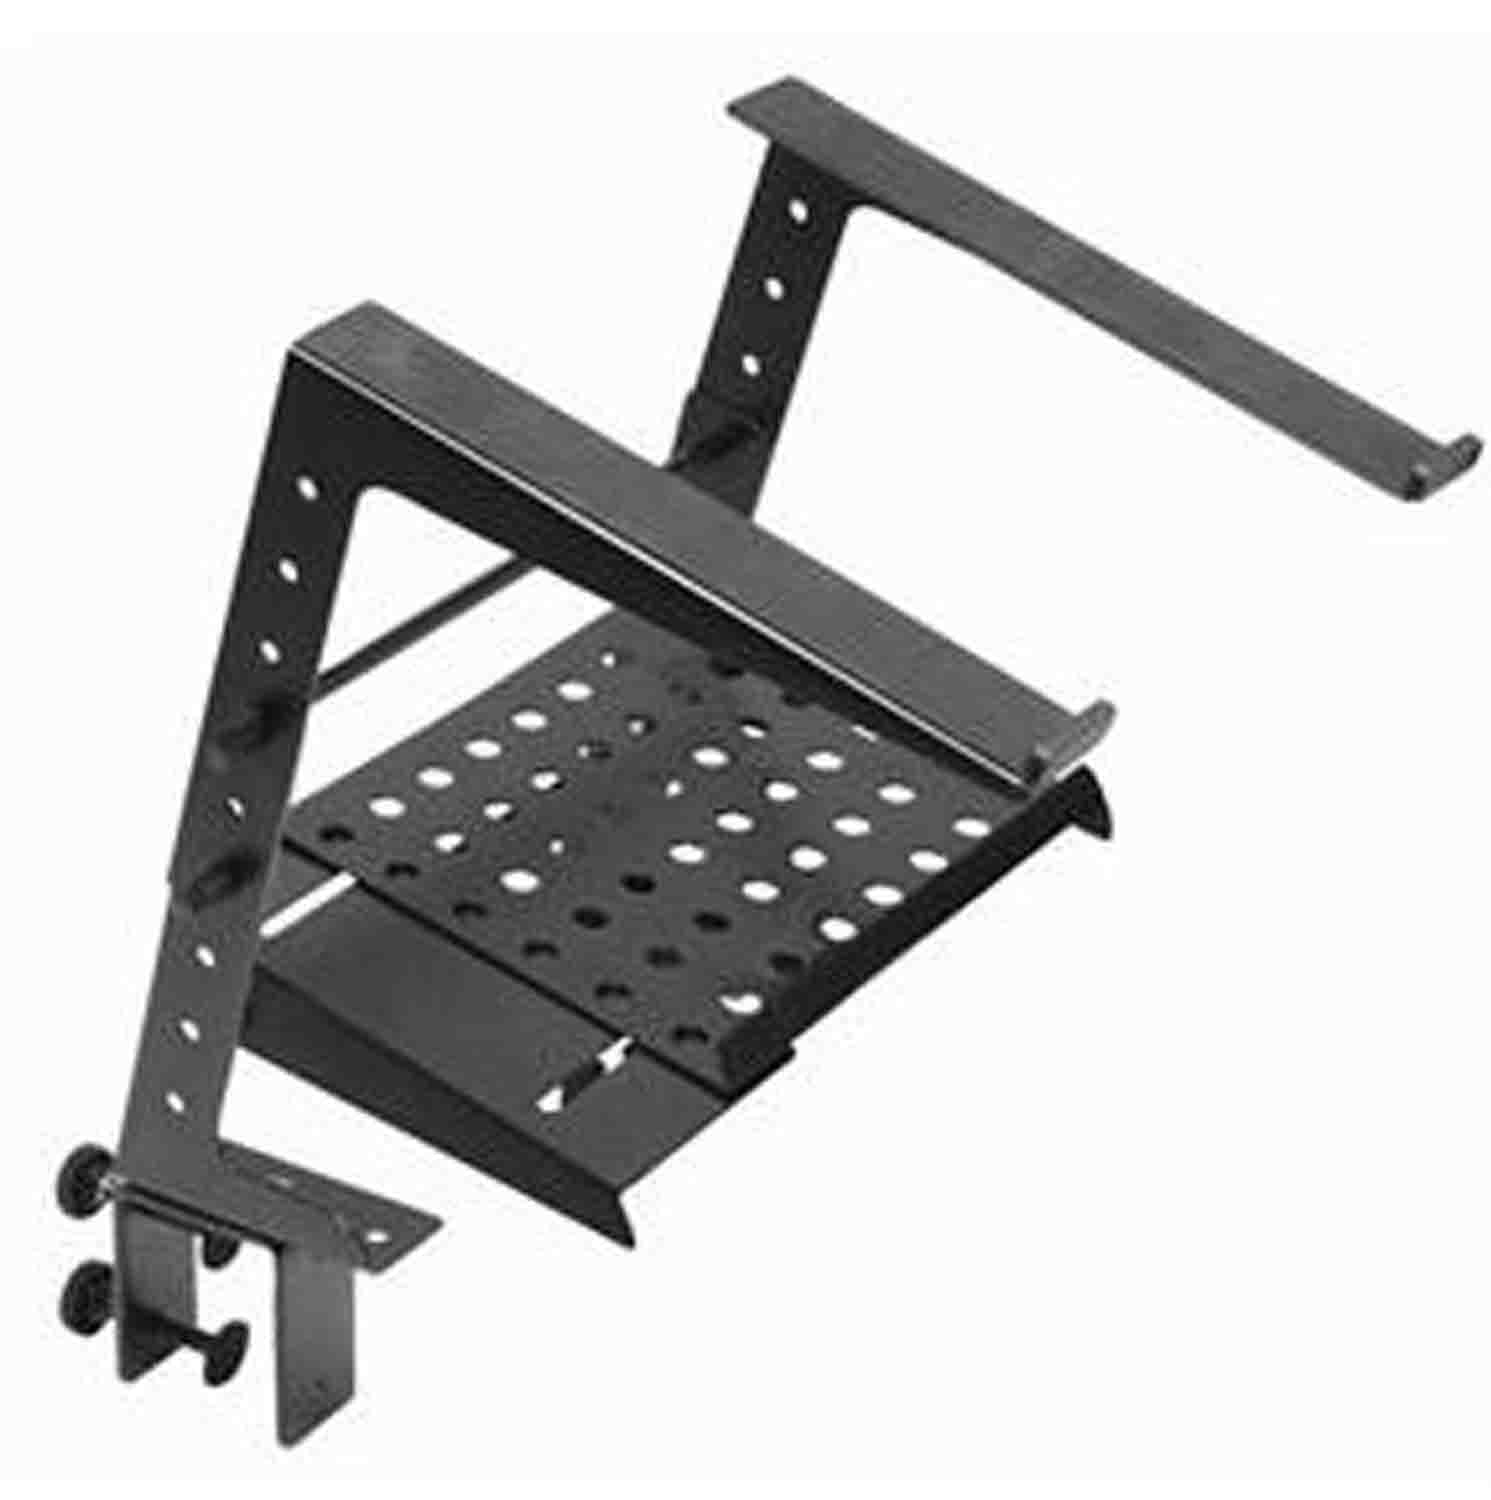 ProX T-ULPS200 Portable Laptop Stand with Adjustable Shelf - Black - Hollywood DJ